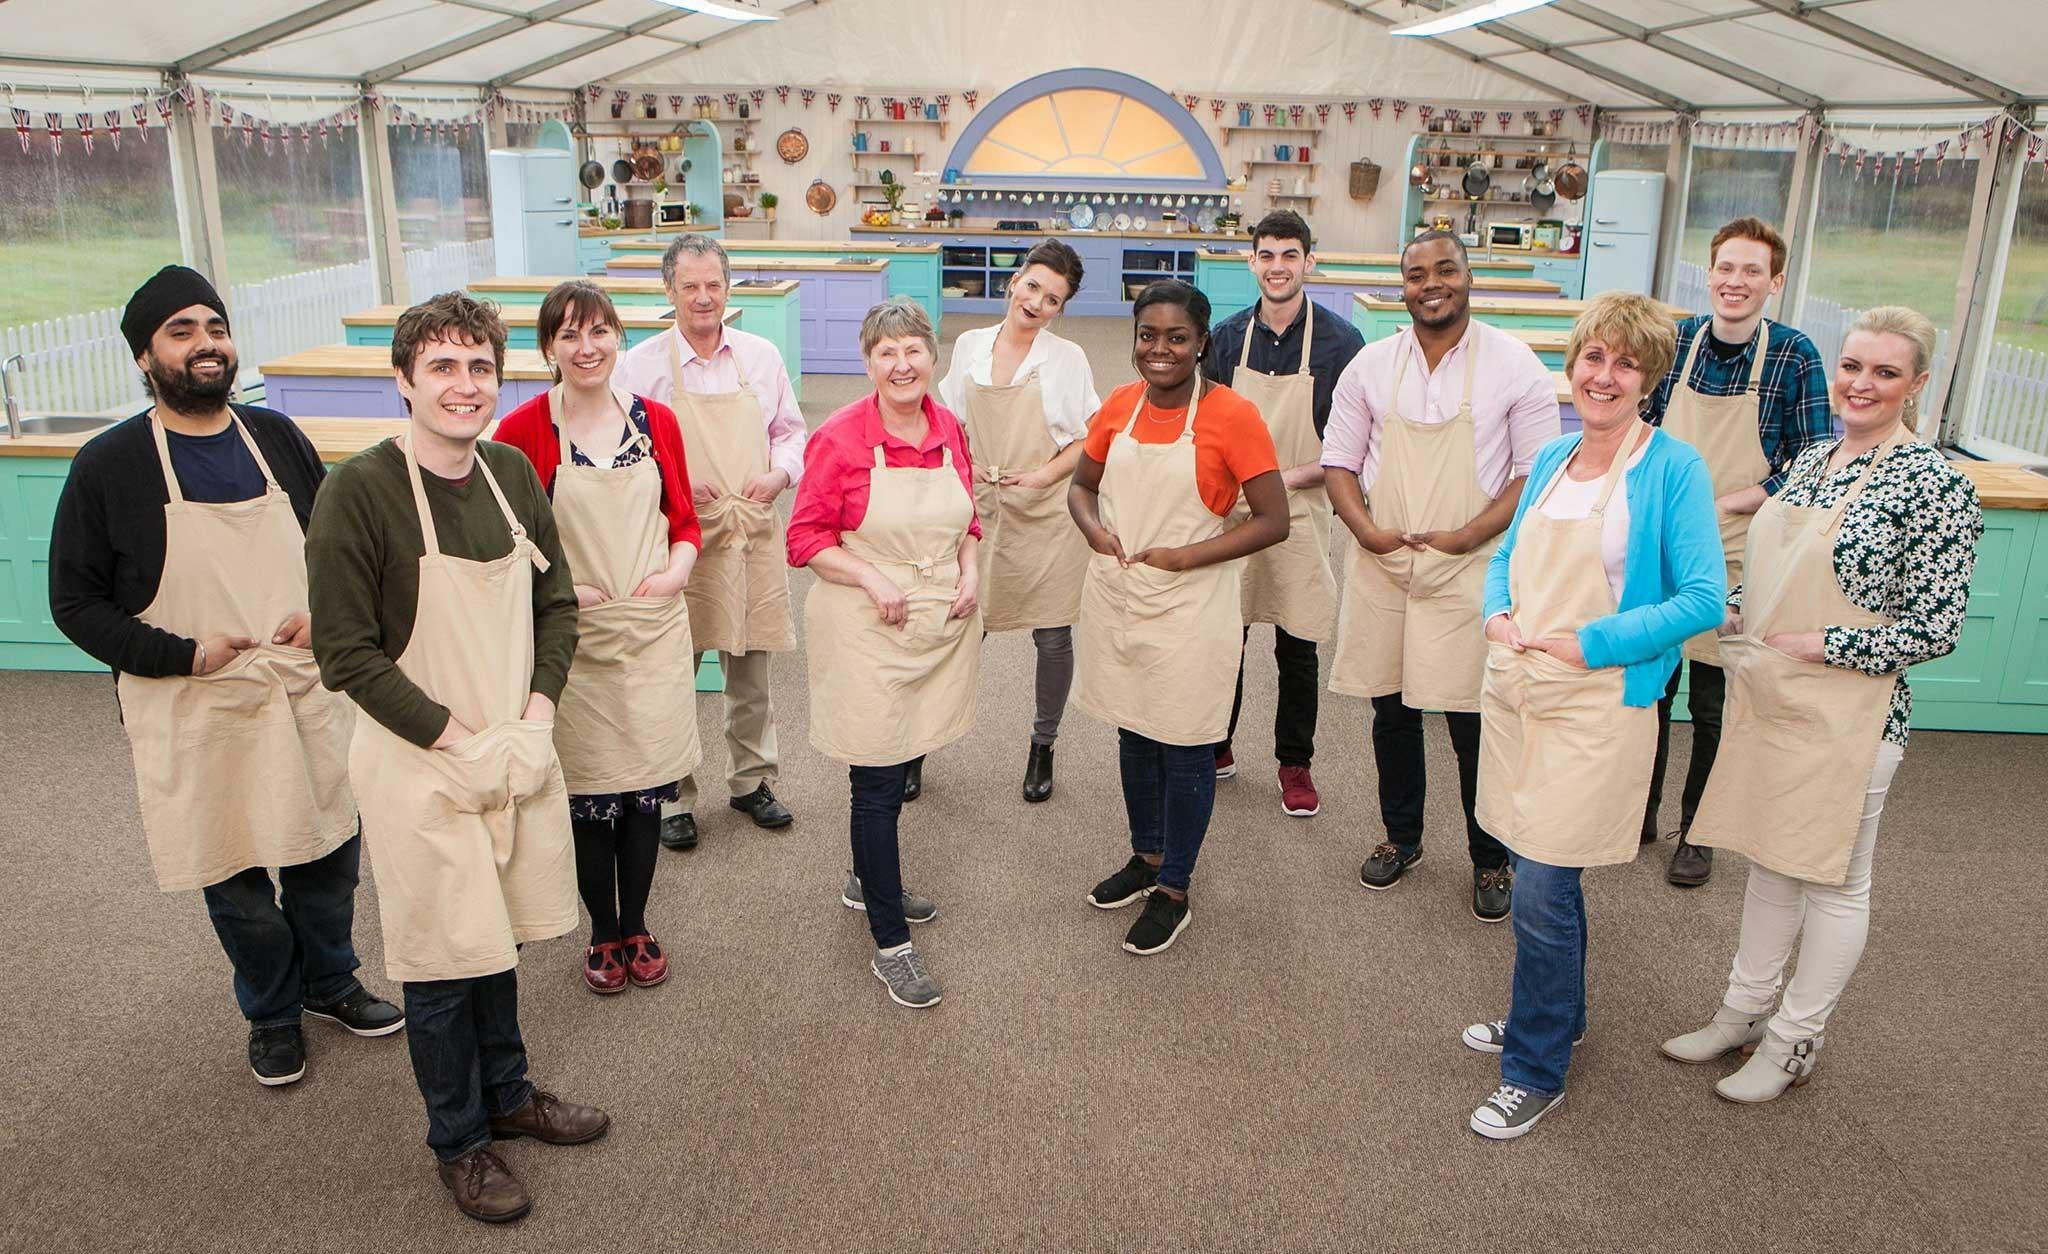 Great British Bake Off 2016 Who will win, judging by the contestants Instagram accounts and blogs? The Independent The Independent